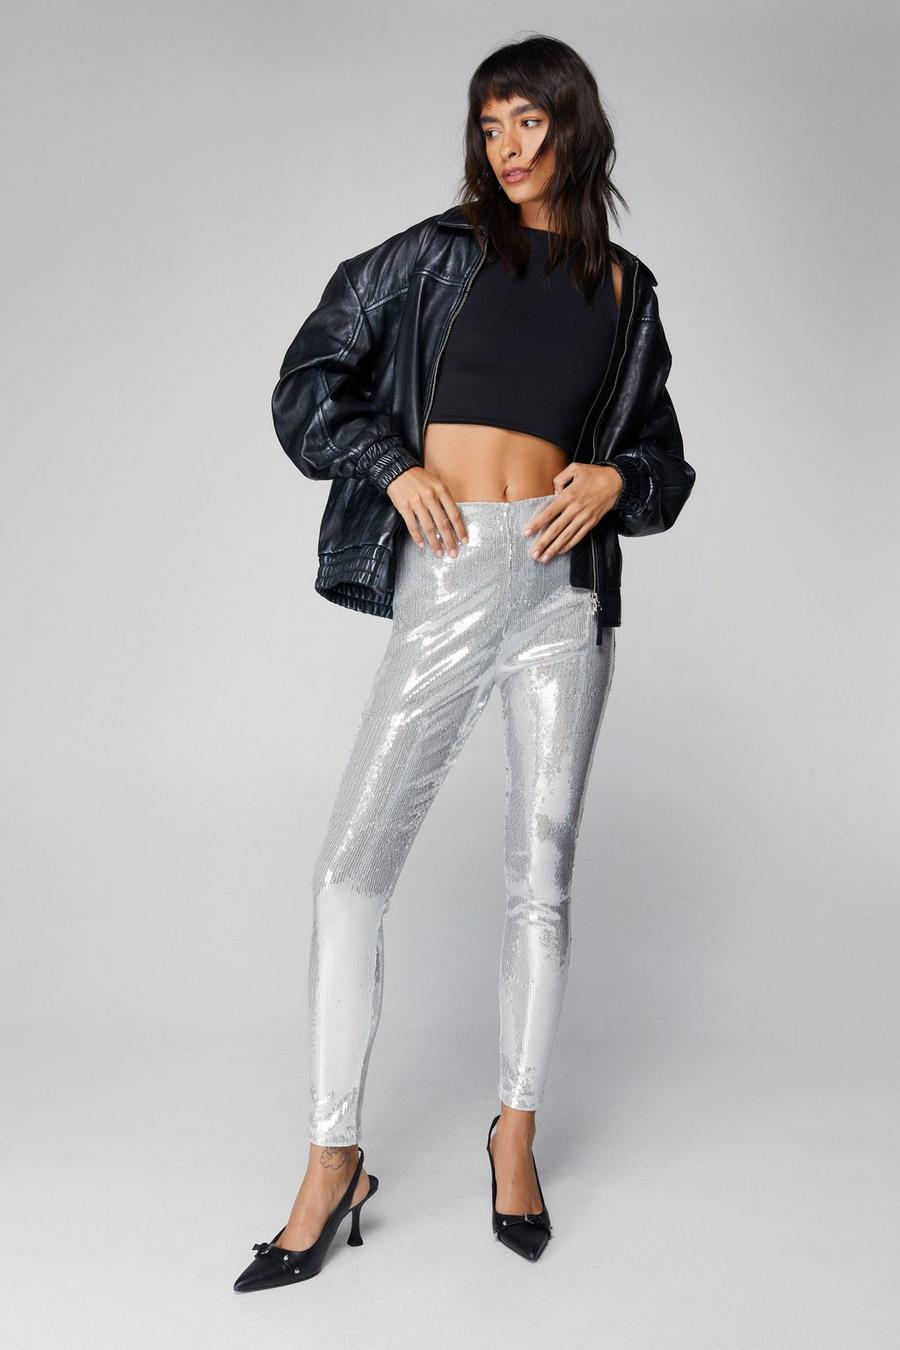 Silver Sequins Leggings  Affordable Trendy and Modest Clothing